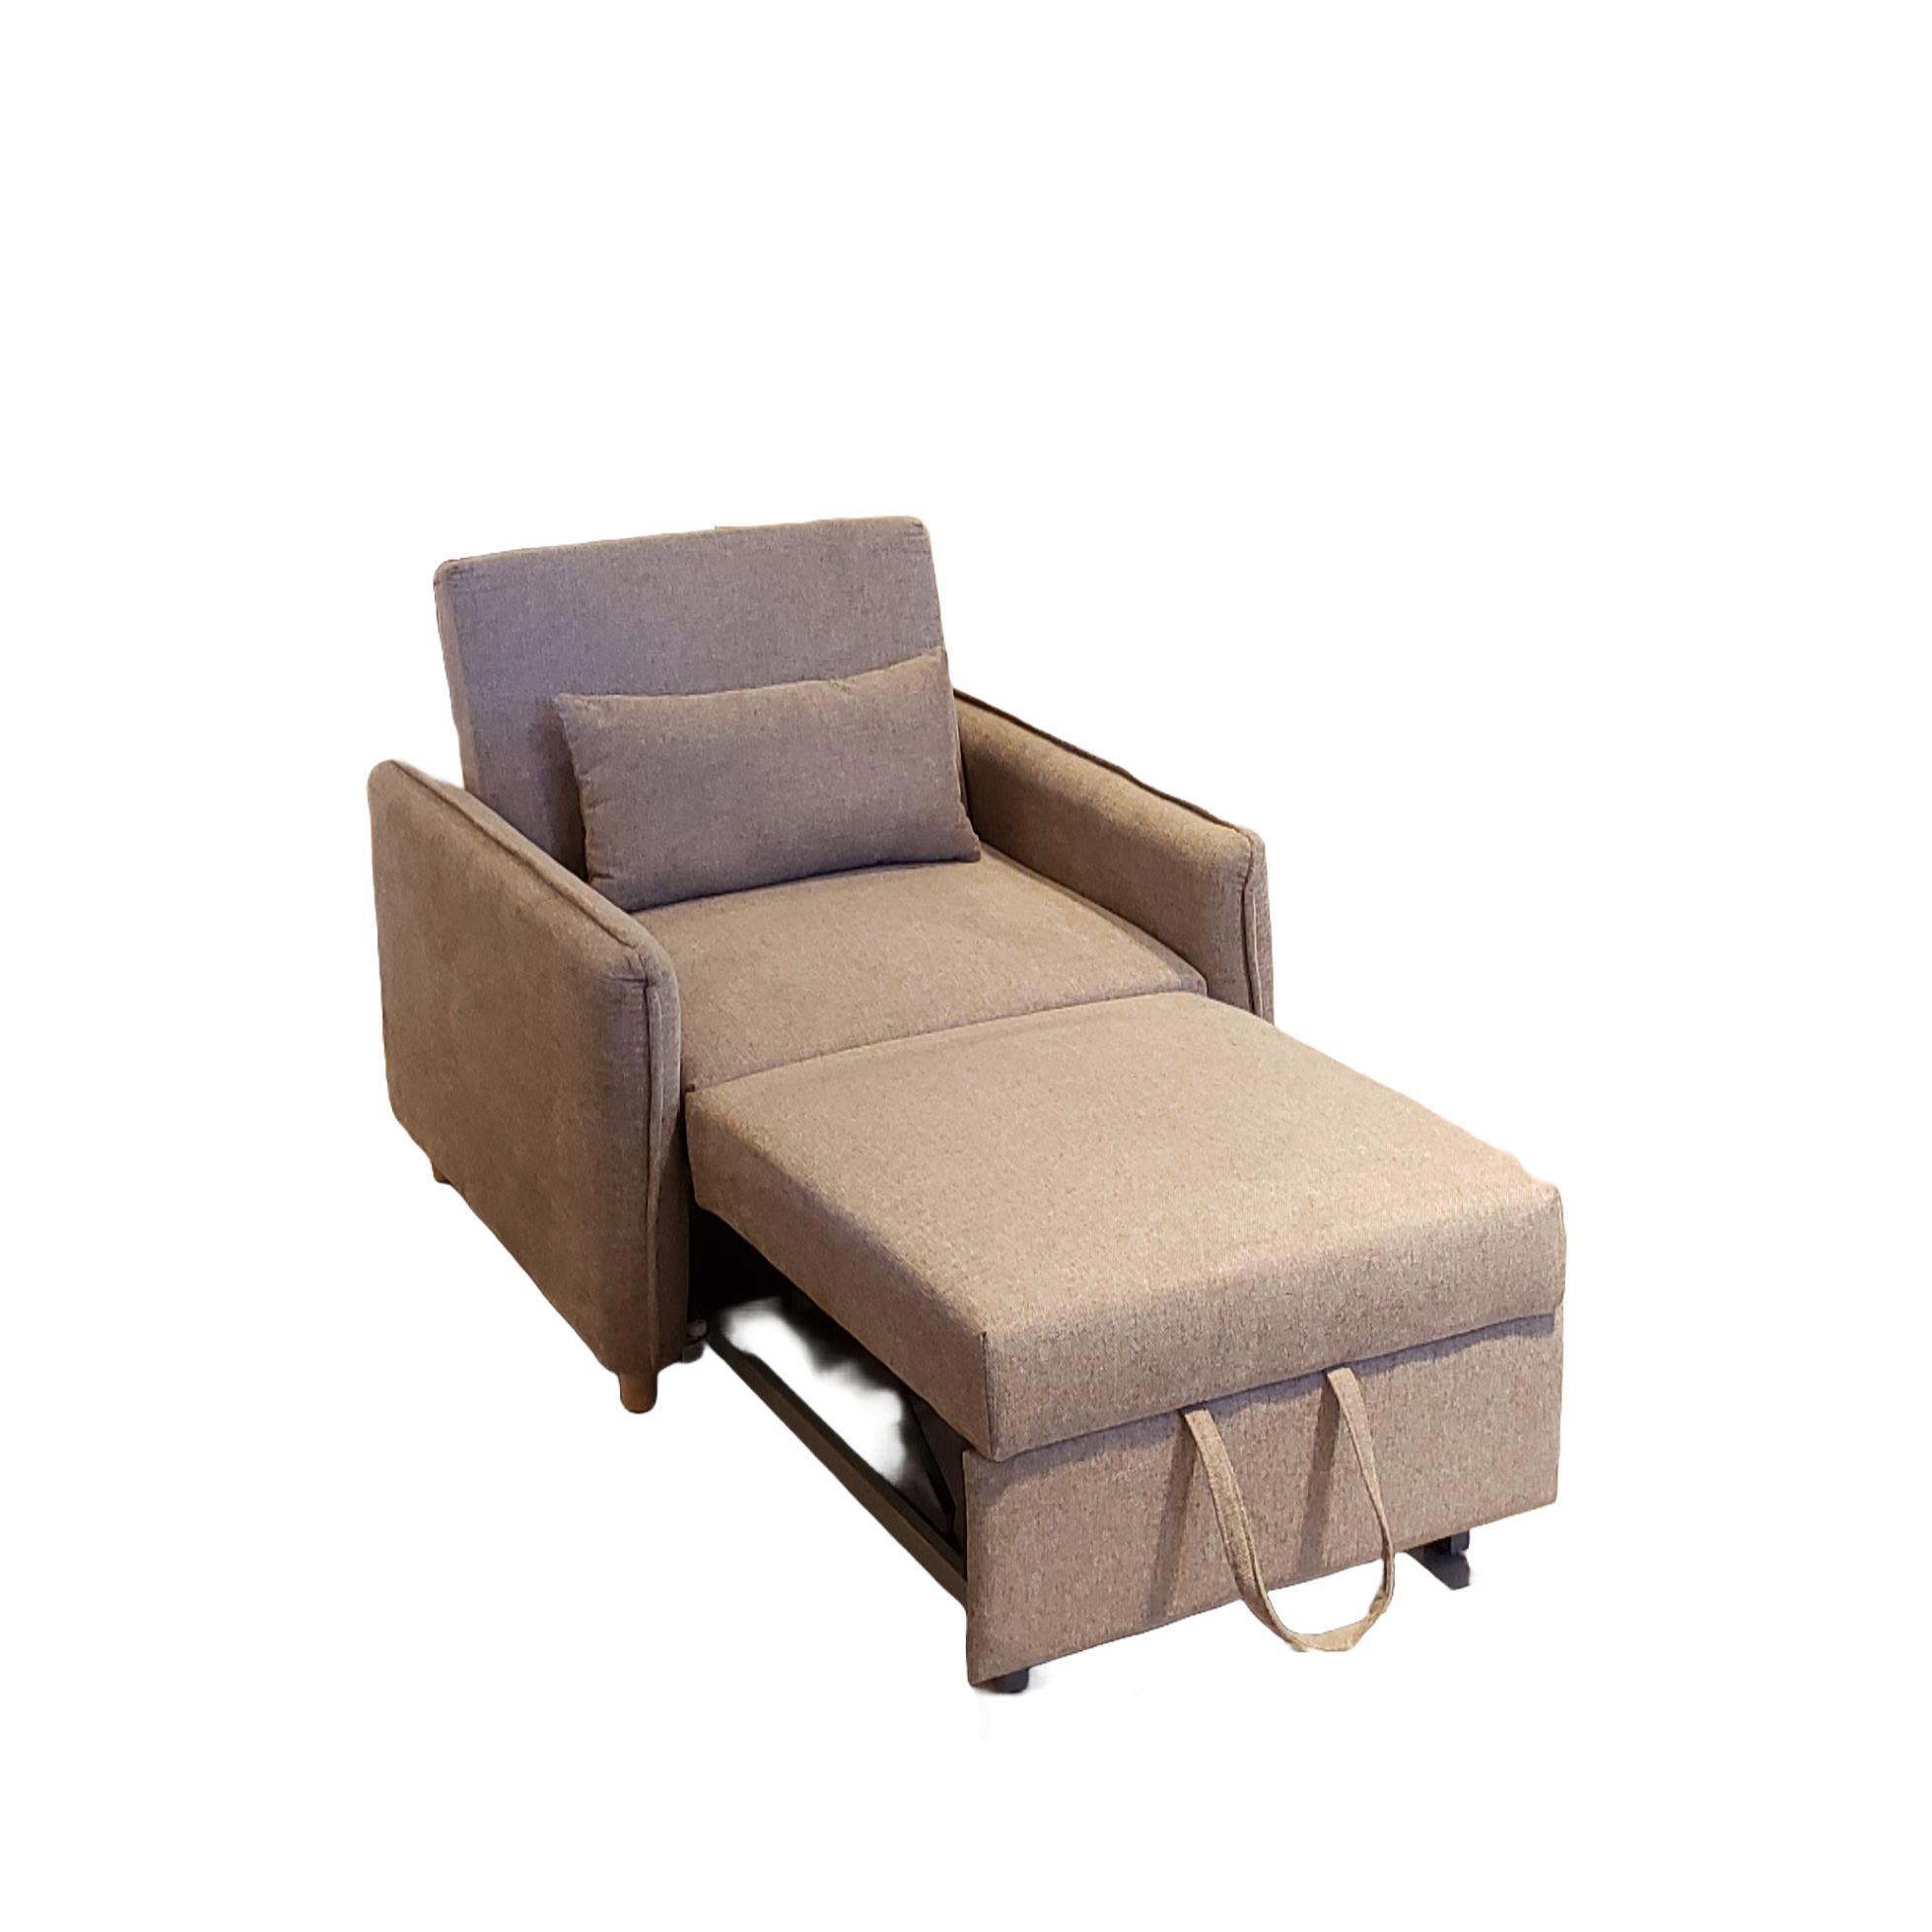 SF3383B 1 Seater Sofa Bed Cream (5).png